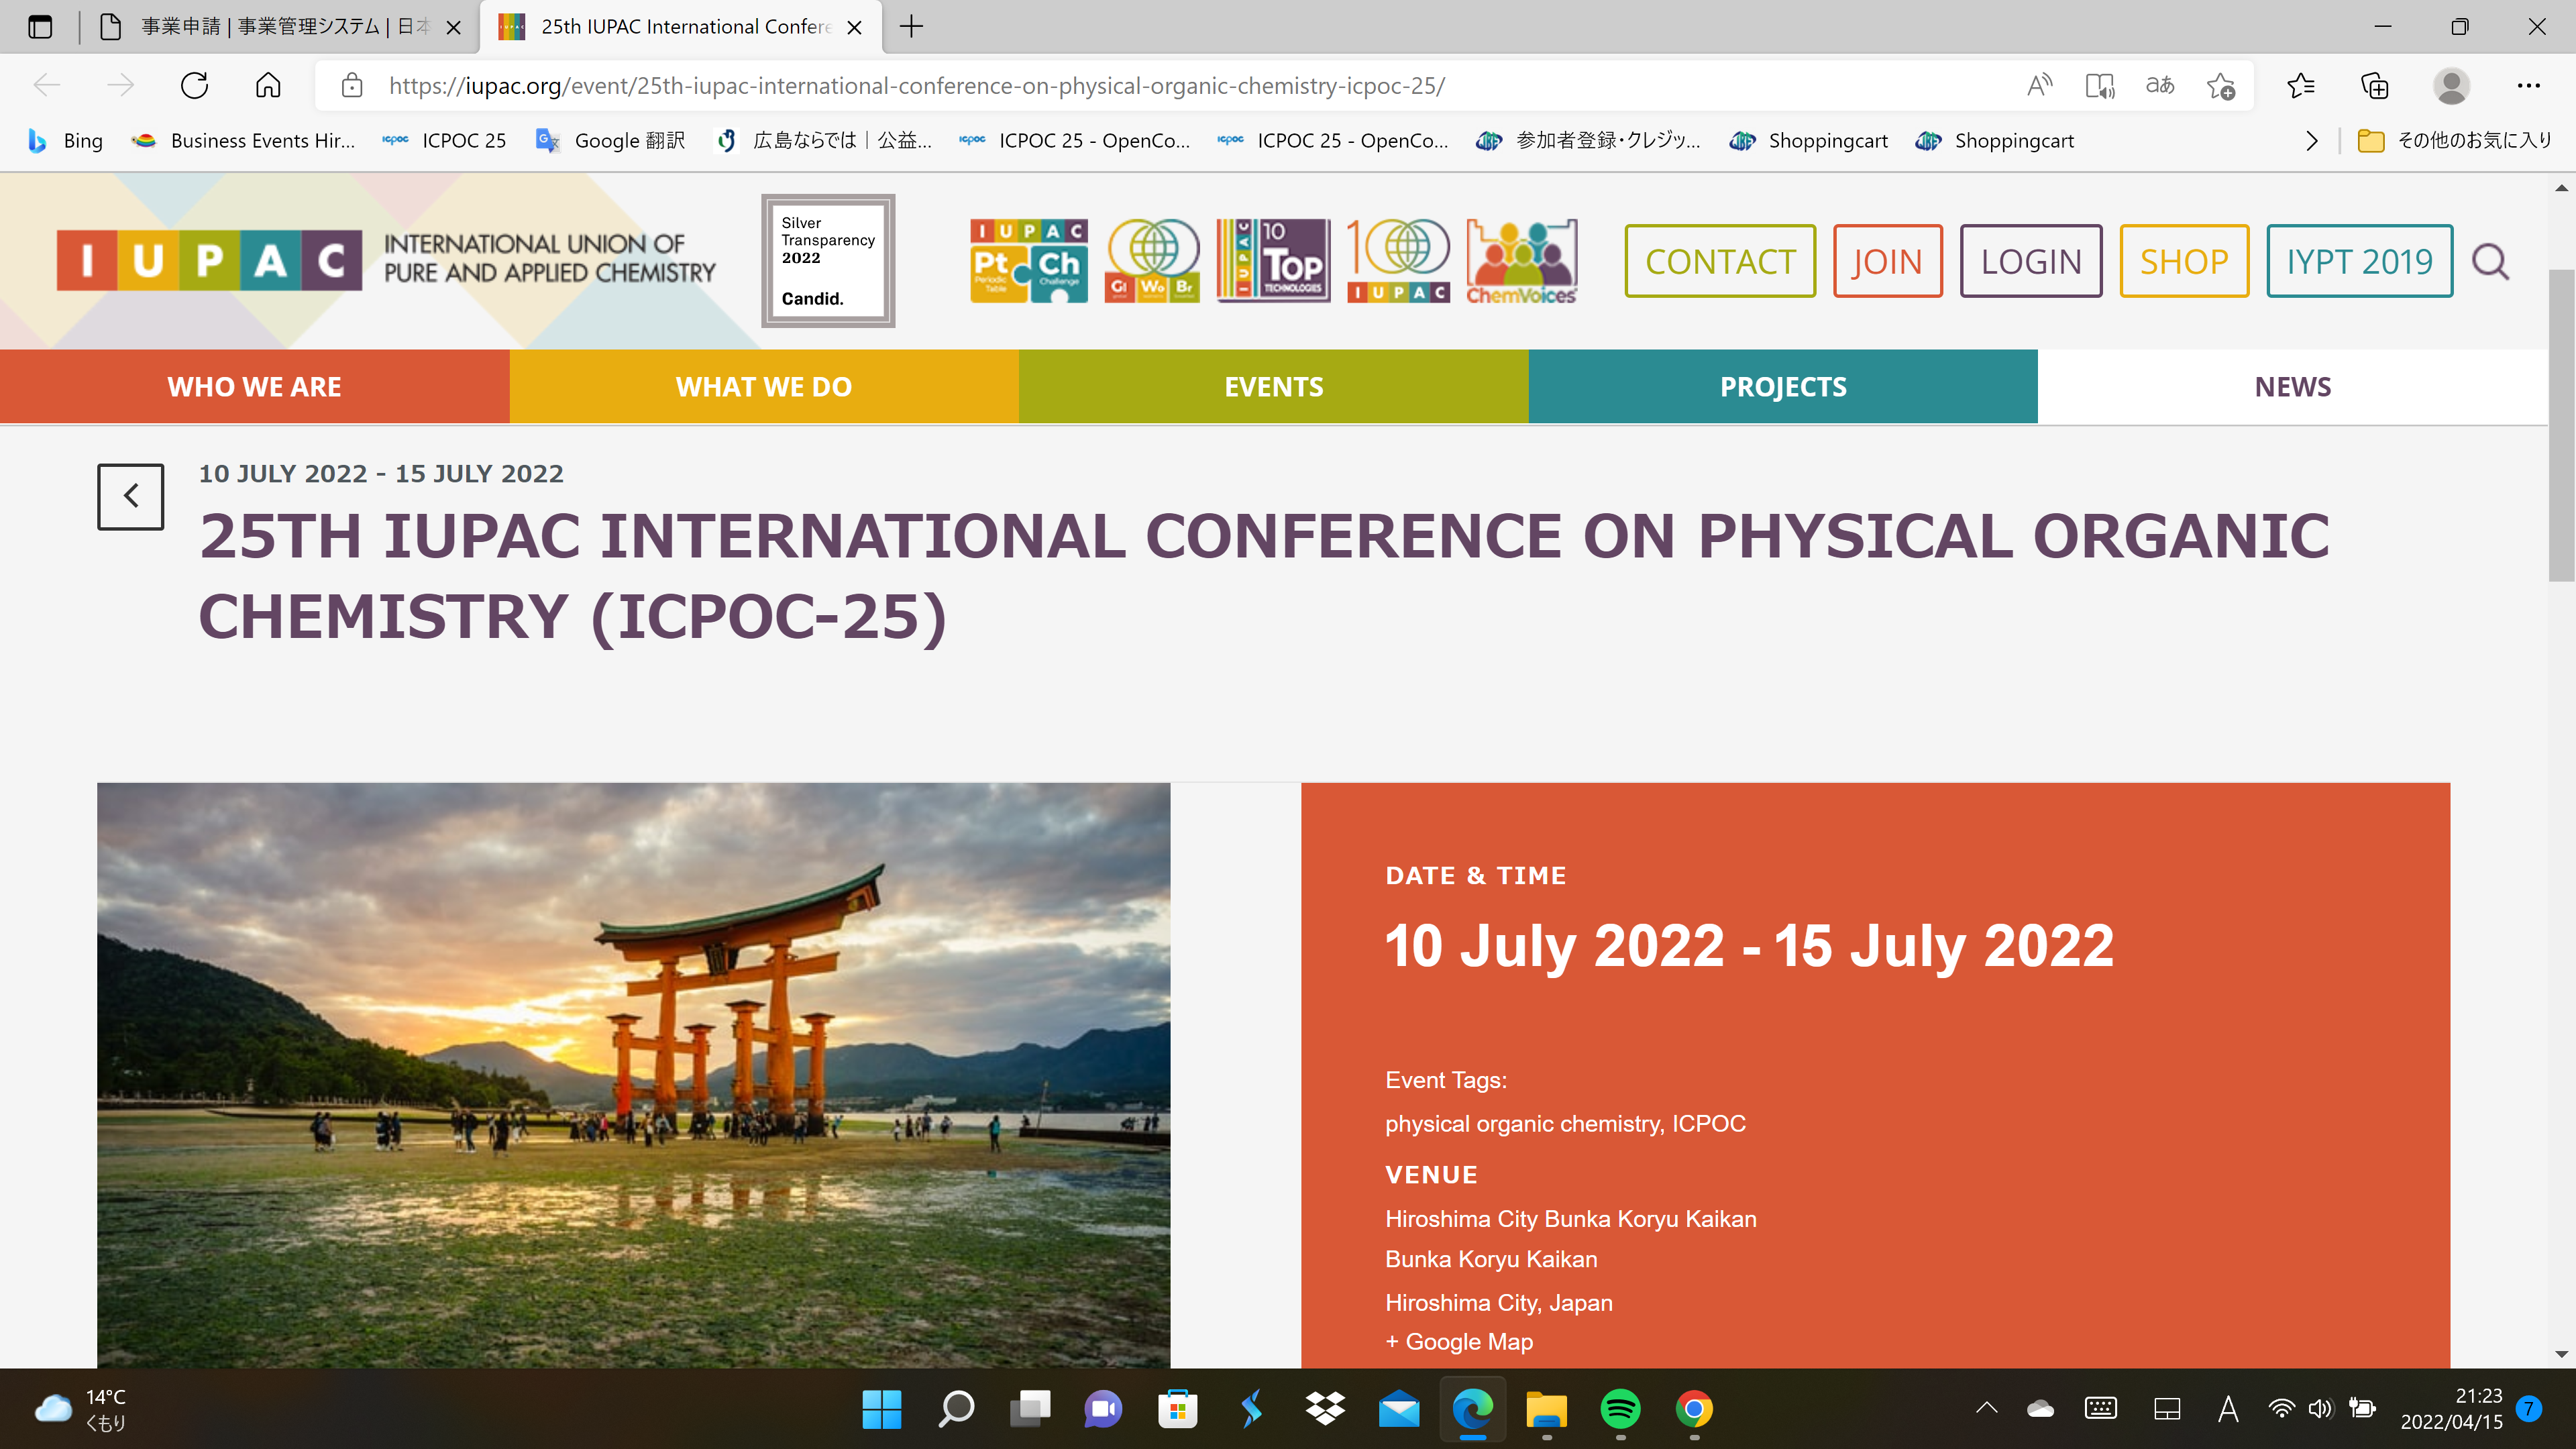 ICPOC25 25th IUPAC International Conference on Physical Organic Chemistry